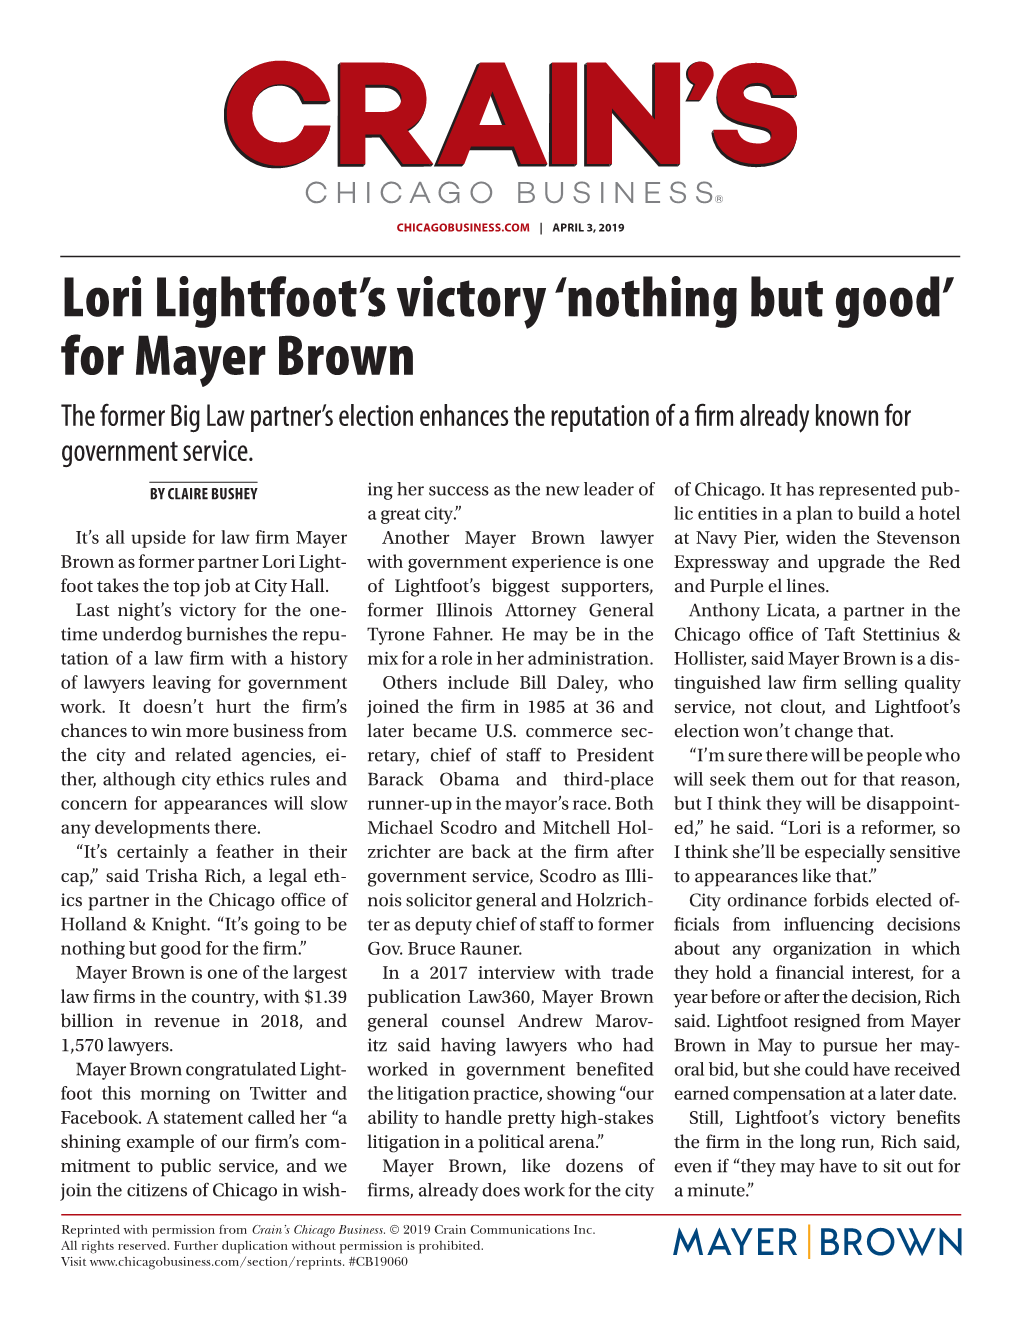 Lori Lightfoot's Victory 'Nothing but Good' for Mayer Brown